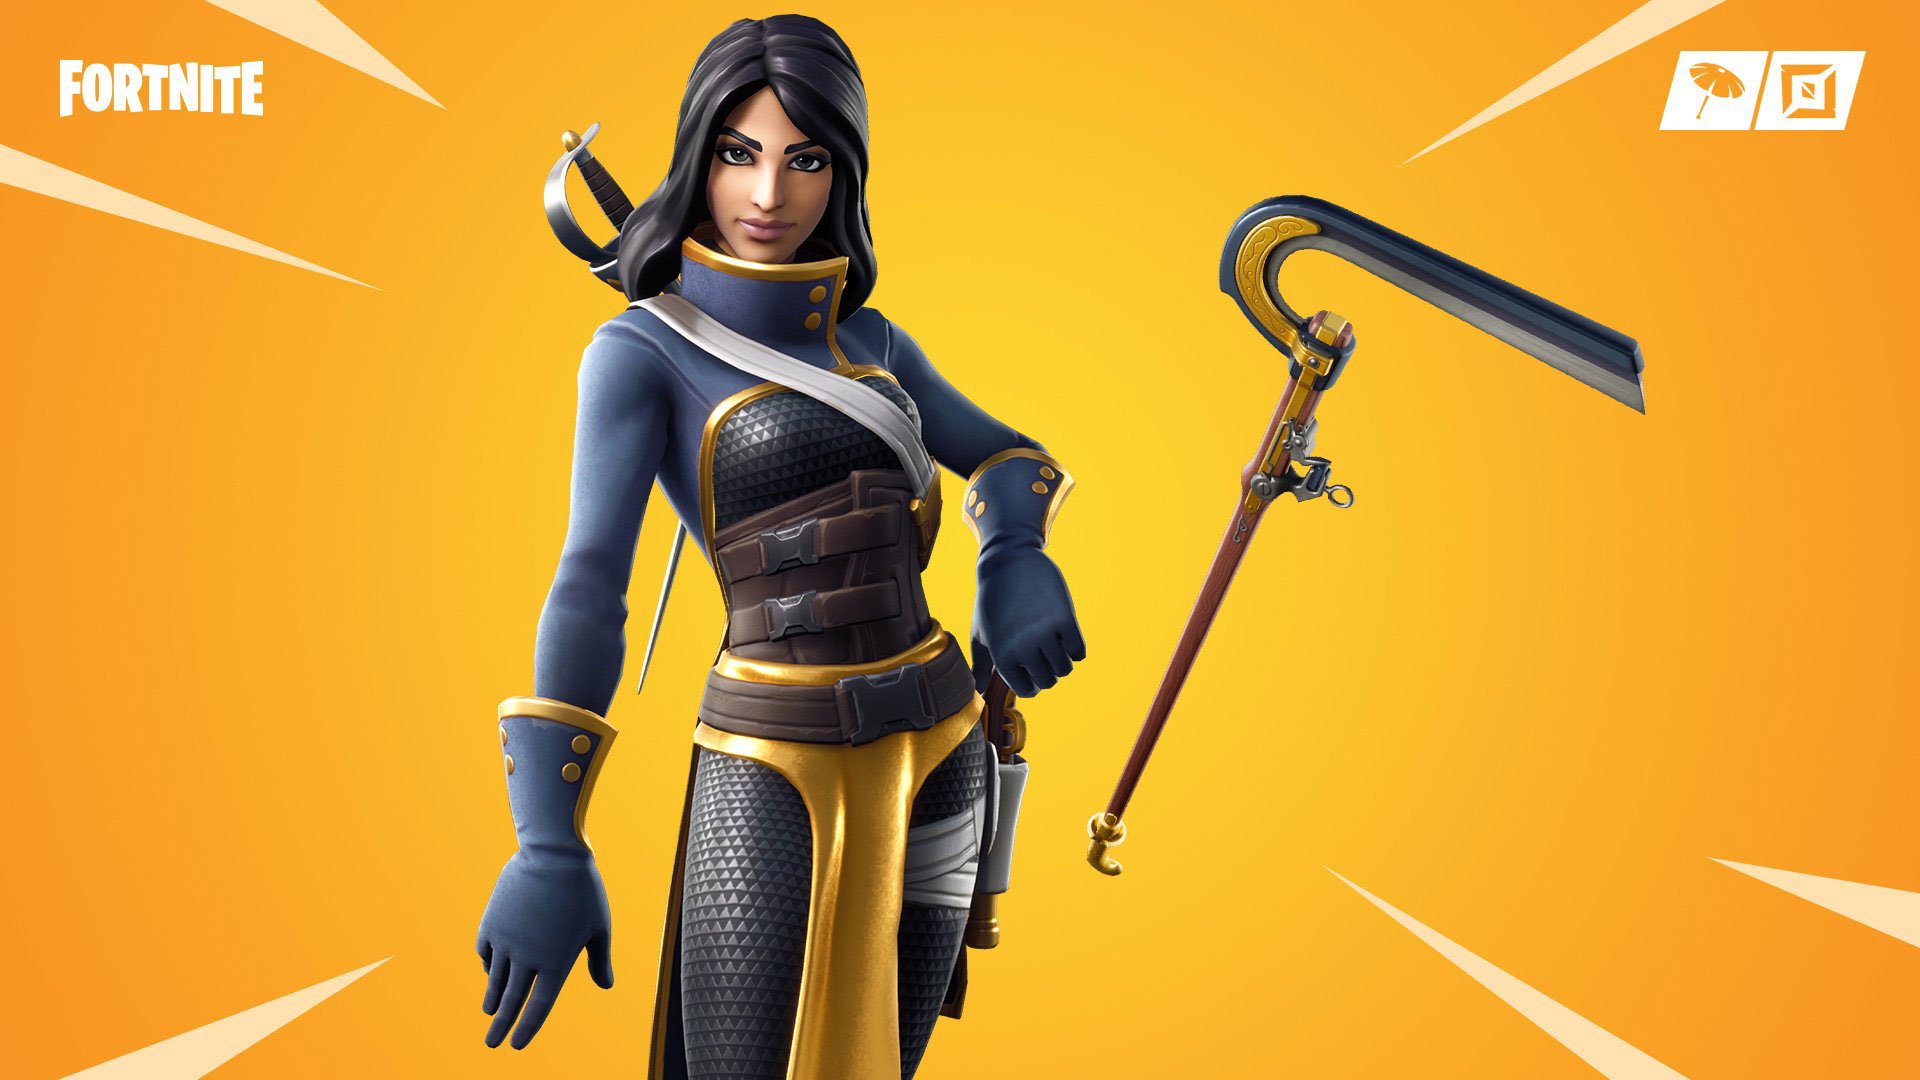 Fortnite Daring Duelist Skin - Outfit, PNGs, Images - Pro ... - 1920 x 1080 jpeg 158kB